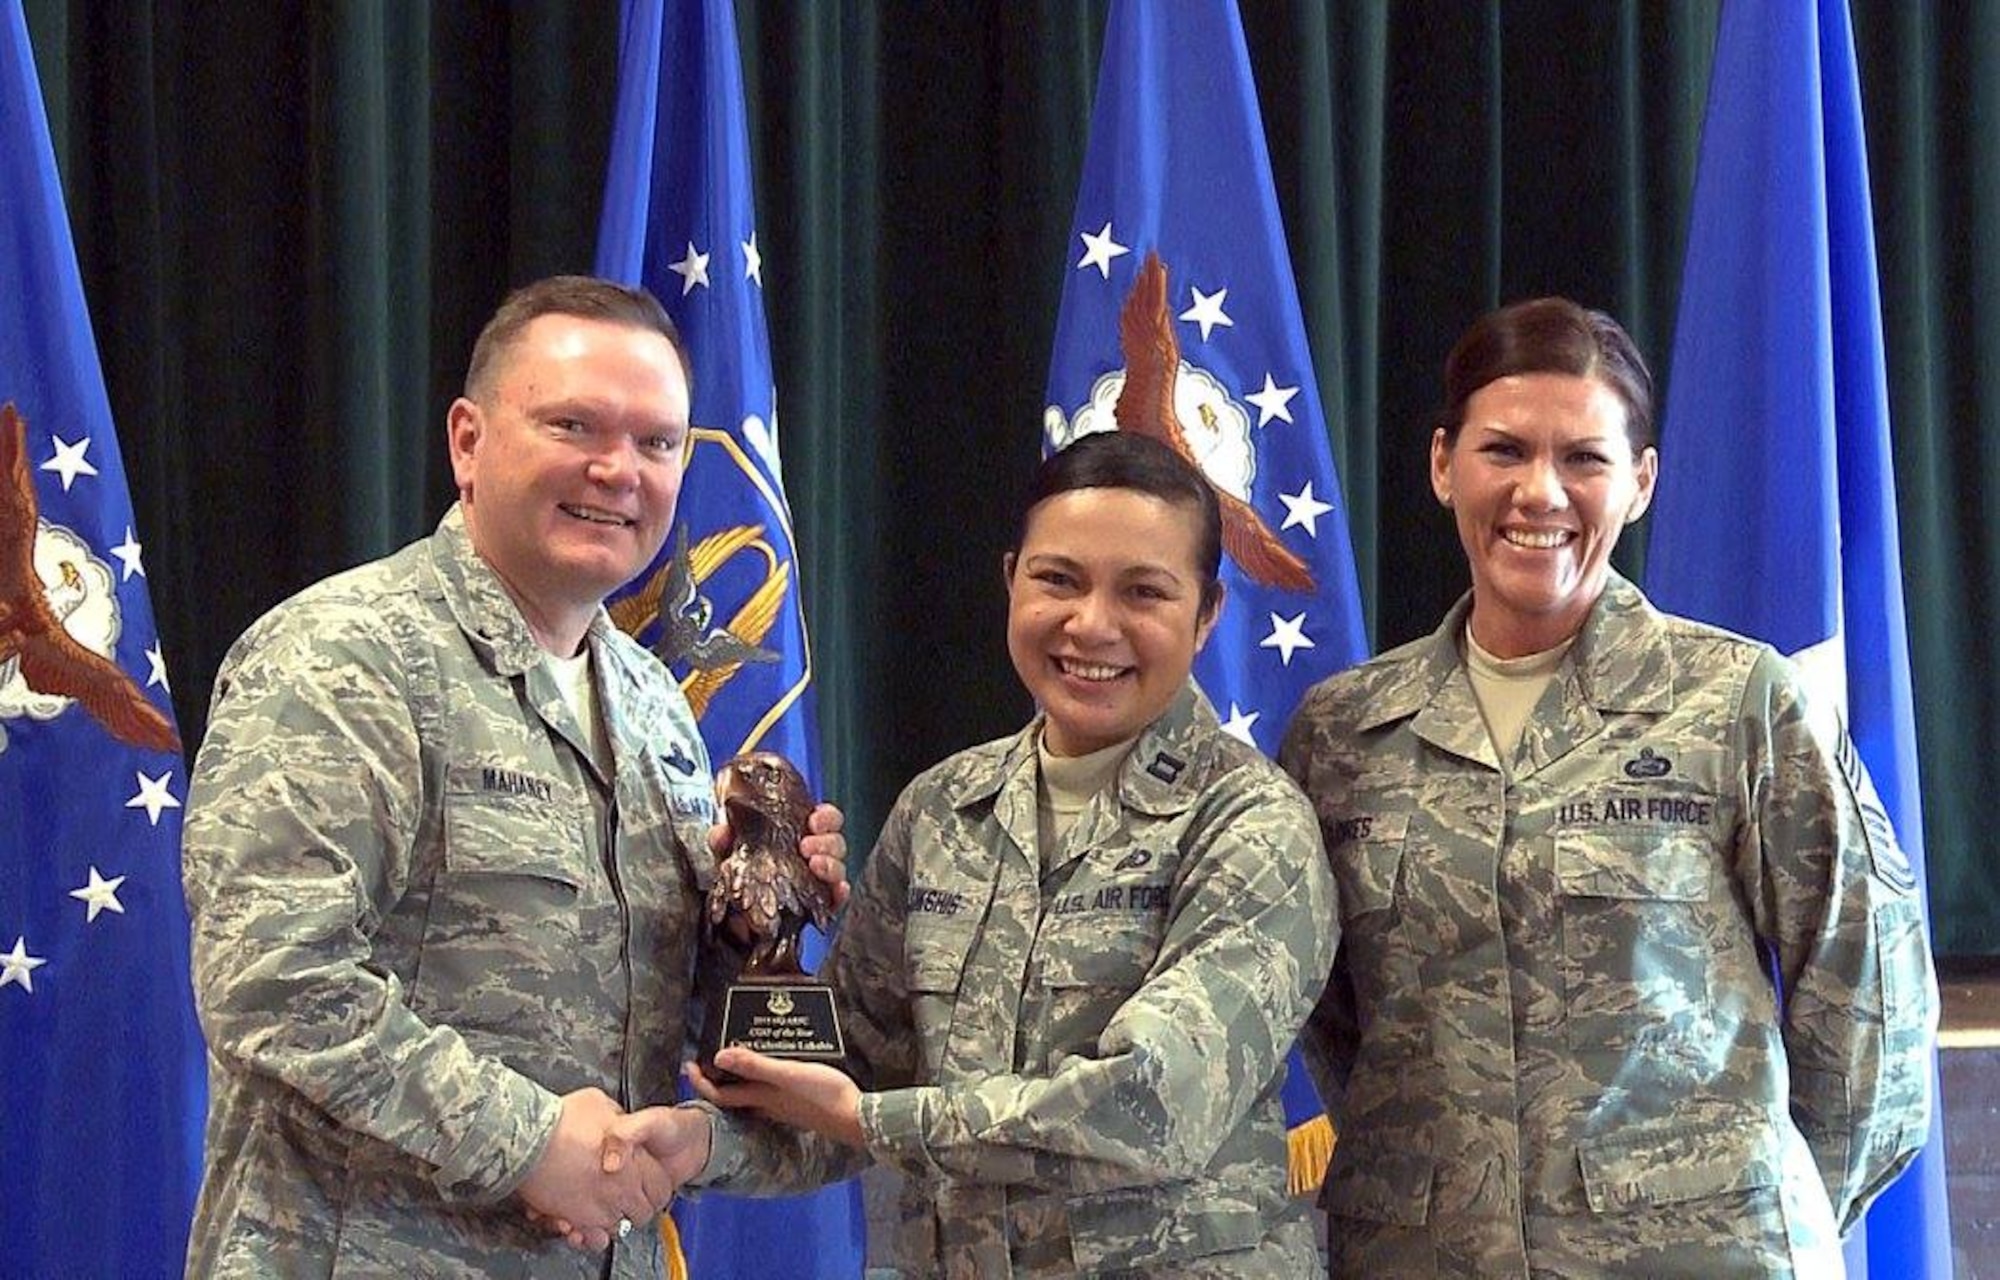 Brig. Gen. Samuel “Bo” Mahaney, Air Reserve Personnel Center commander, and Chief Master Sgt. Ruthe Flores, ARPC command chief, present the ARPC Company Grade Officer of the Year award to Capt. Celestine Lukshis. Mahaney honored ARPC’s 2015 outstanding performers of the year Feb. 16, 2016, at the Heritage Eagle Bend Country Club in Aurora, Colo. (U.S. Air Force photo/Quinn Jacobson)